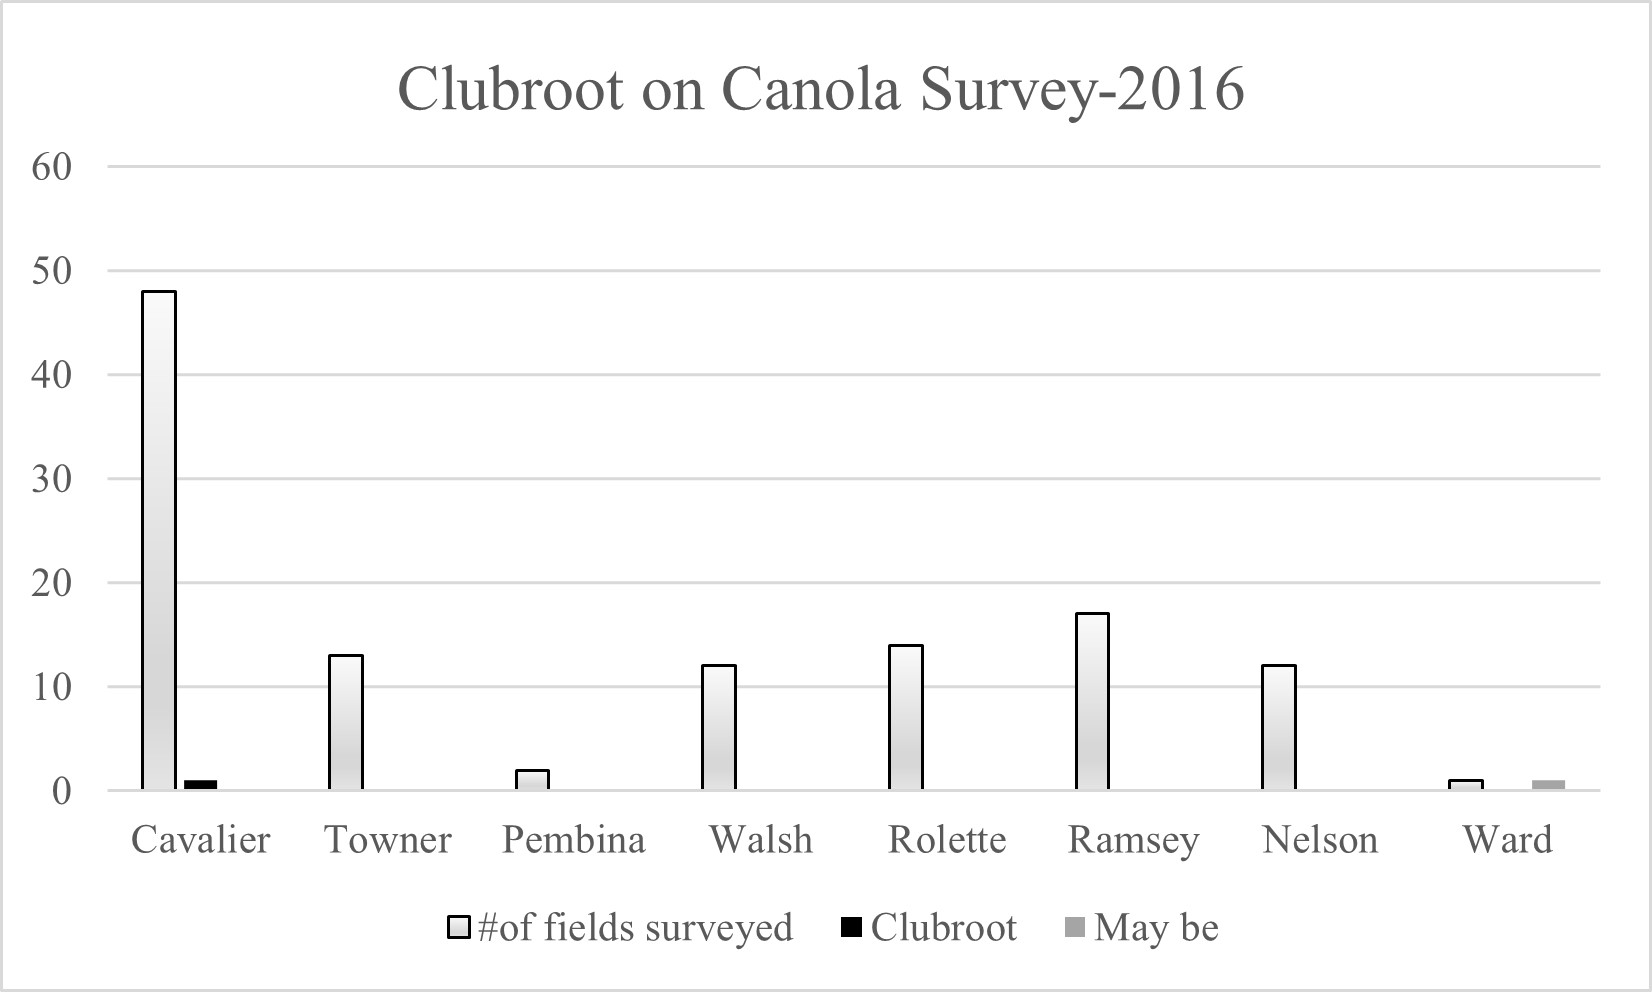 Fields surveyed in 2016 for prevalence of clubroot over eight counties.